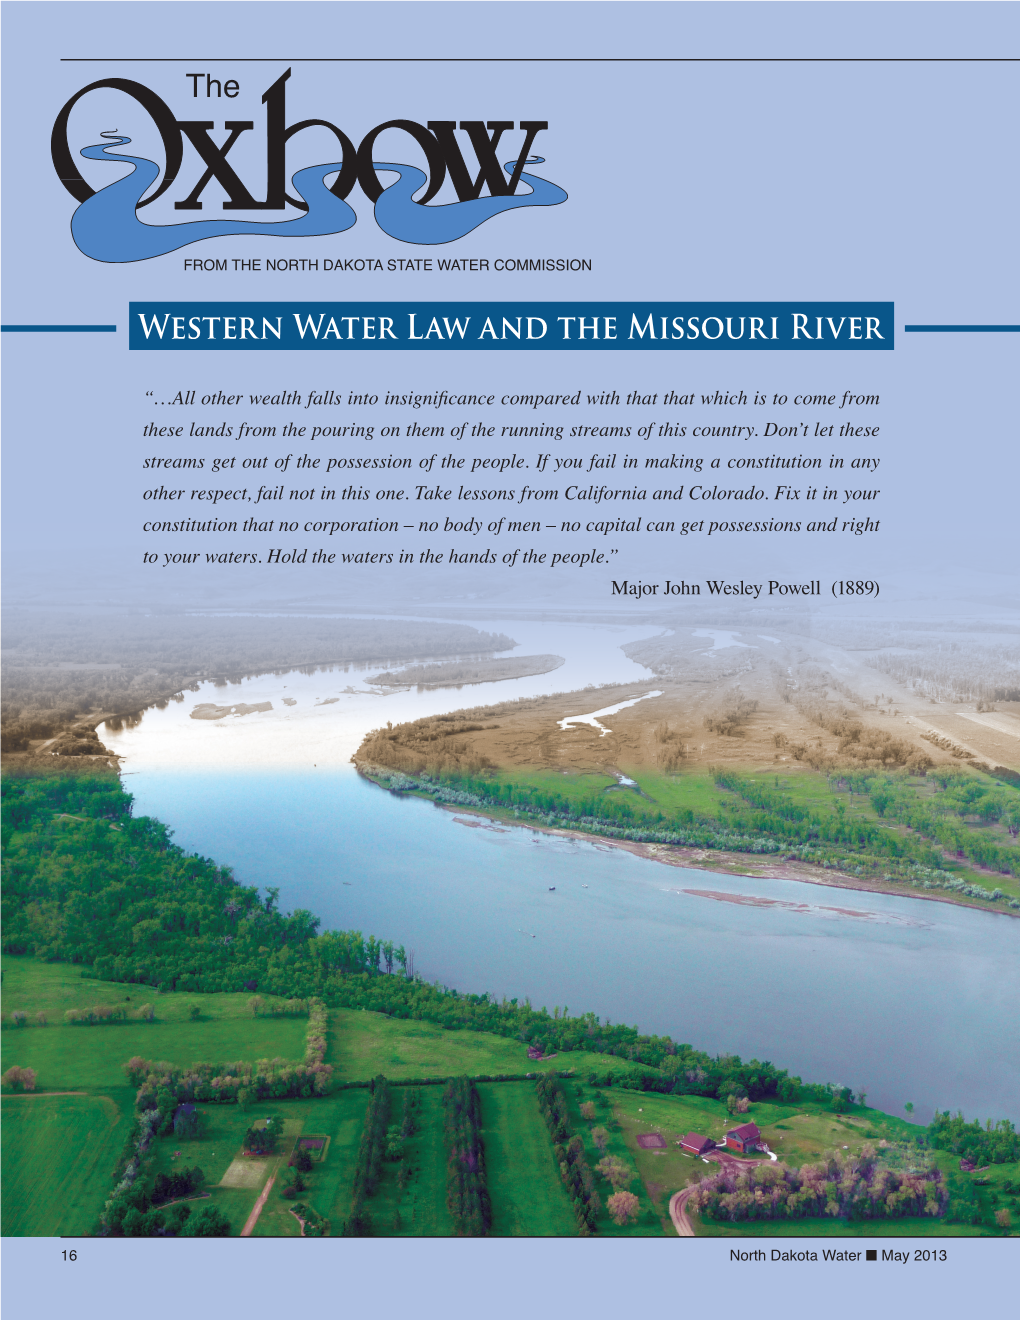 The Western Water Law and the Missouri River